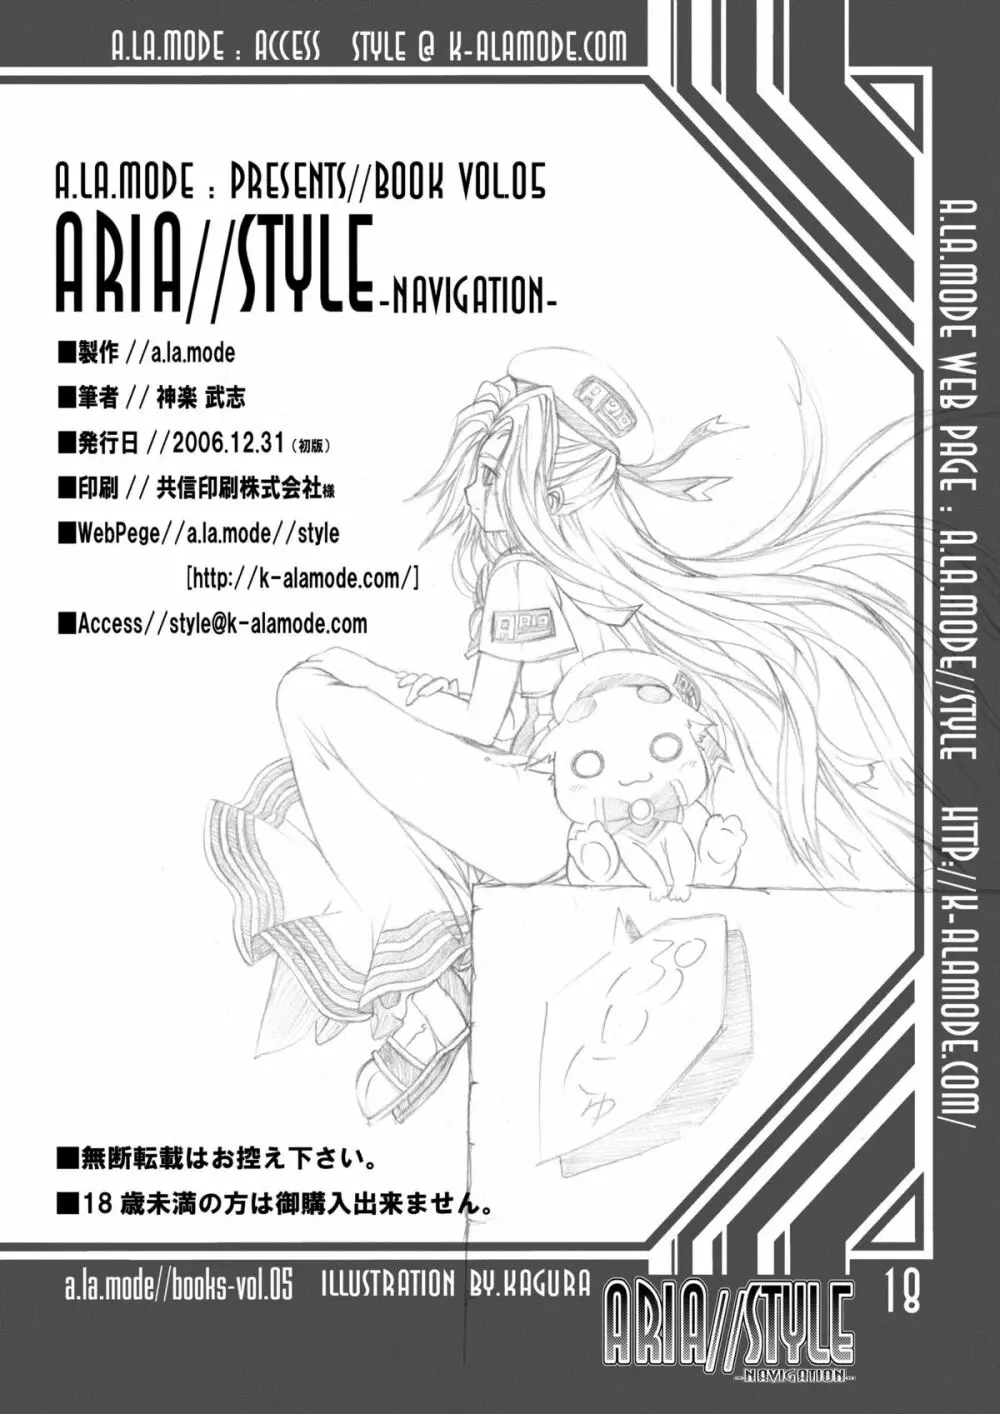 ARIA//Style -Navigation- Page.17